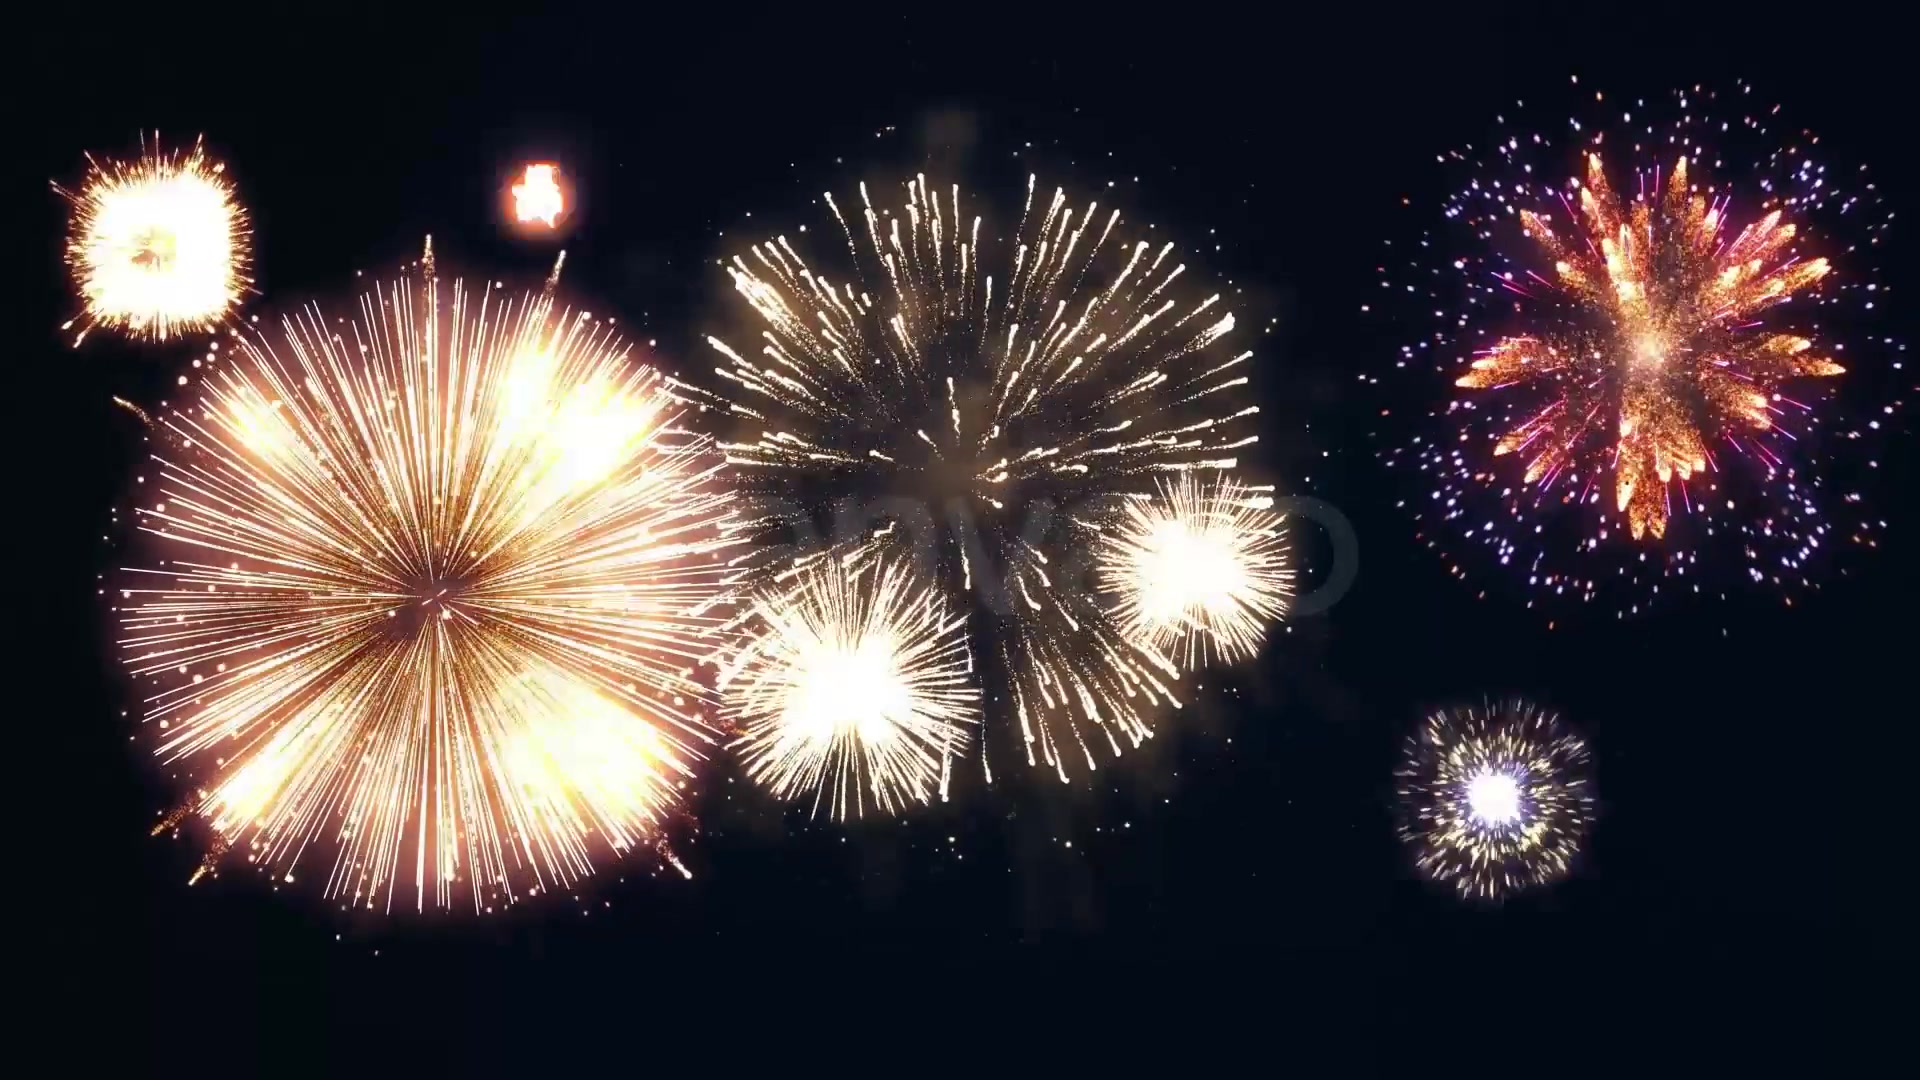 fireworks after effects project download